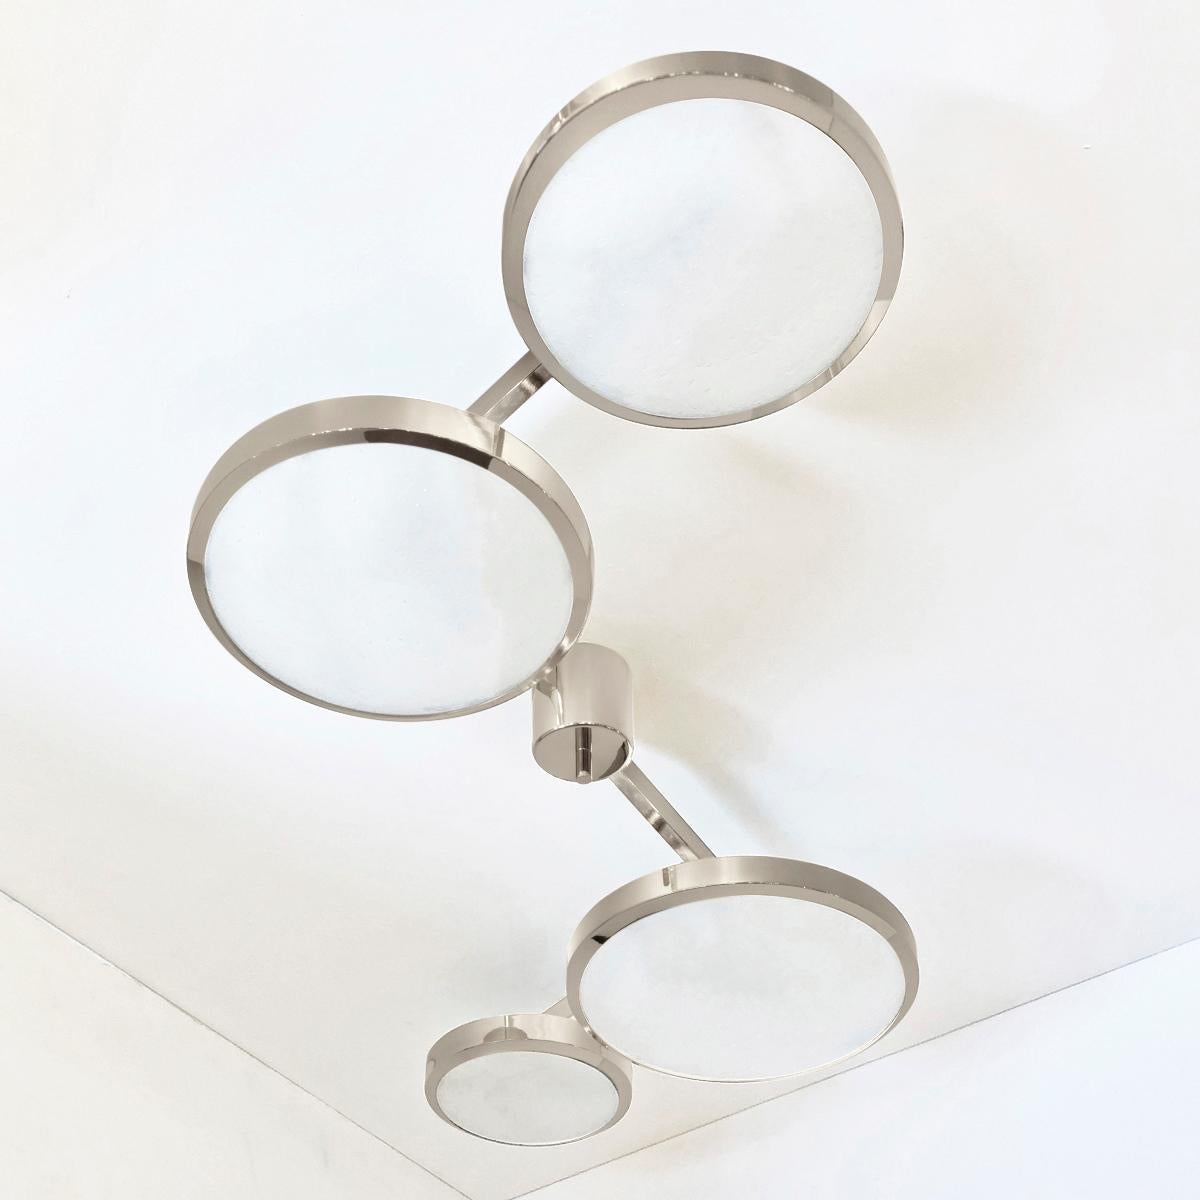 Italian Quattro Ceiling Light by Gaspare Asaro - Polished Brass Finish For Sale